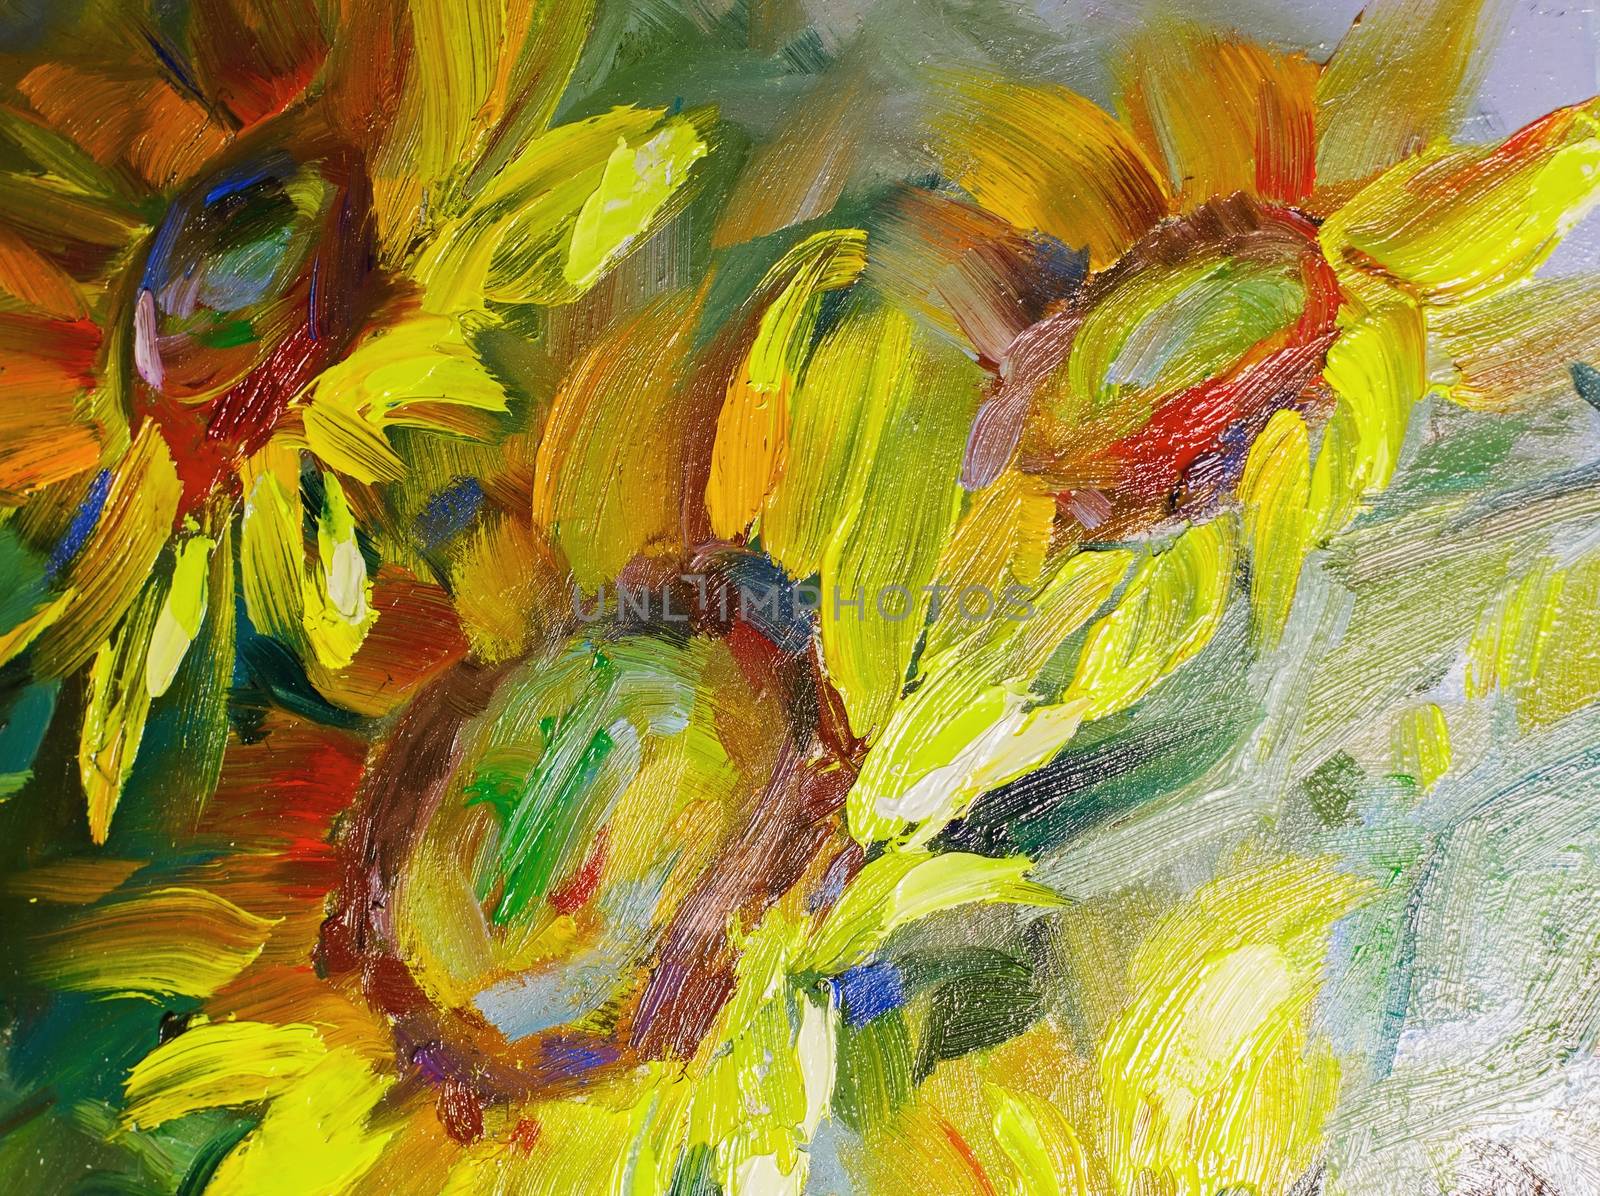 Texture of oil paintings, flowers, painting fragment of painted color image, wallpaper and backgrounds, for backgrounds and textures floral pattern in oil on canvas